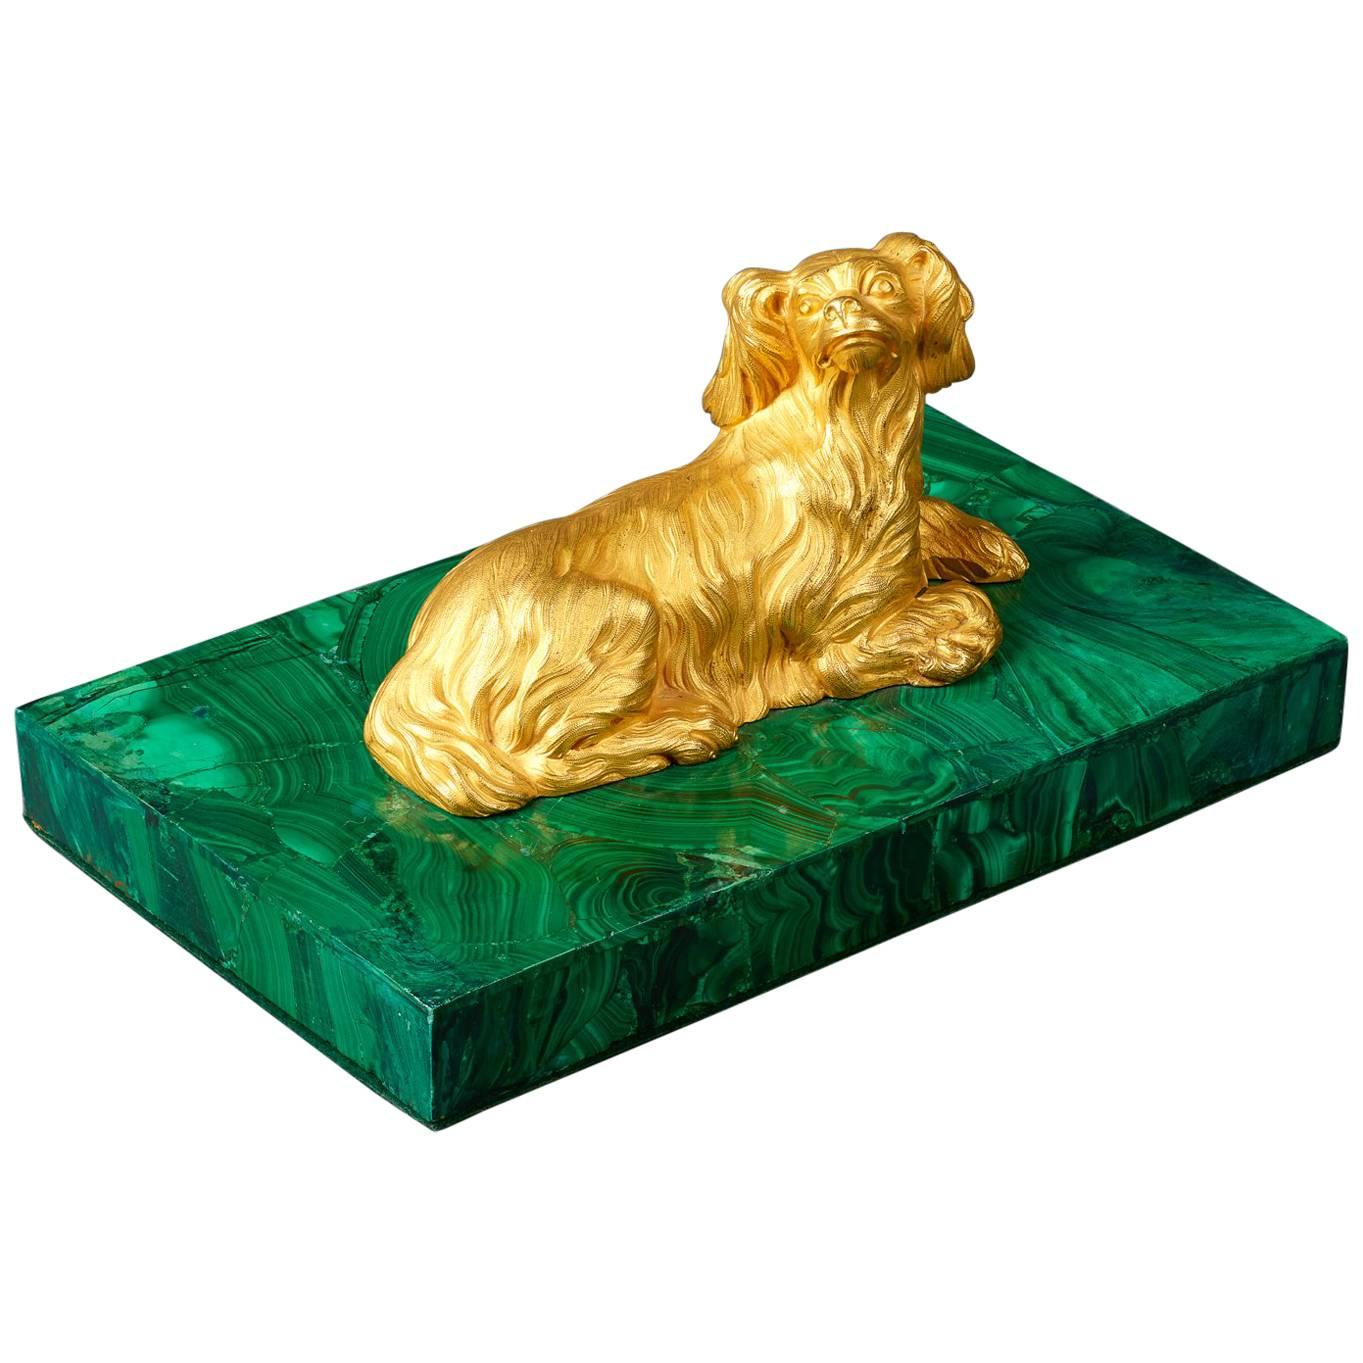 Early 19th Century Empire Russian Malachite and Ormolu Paperweight Spaniel Dog For Sale